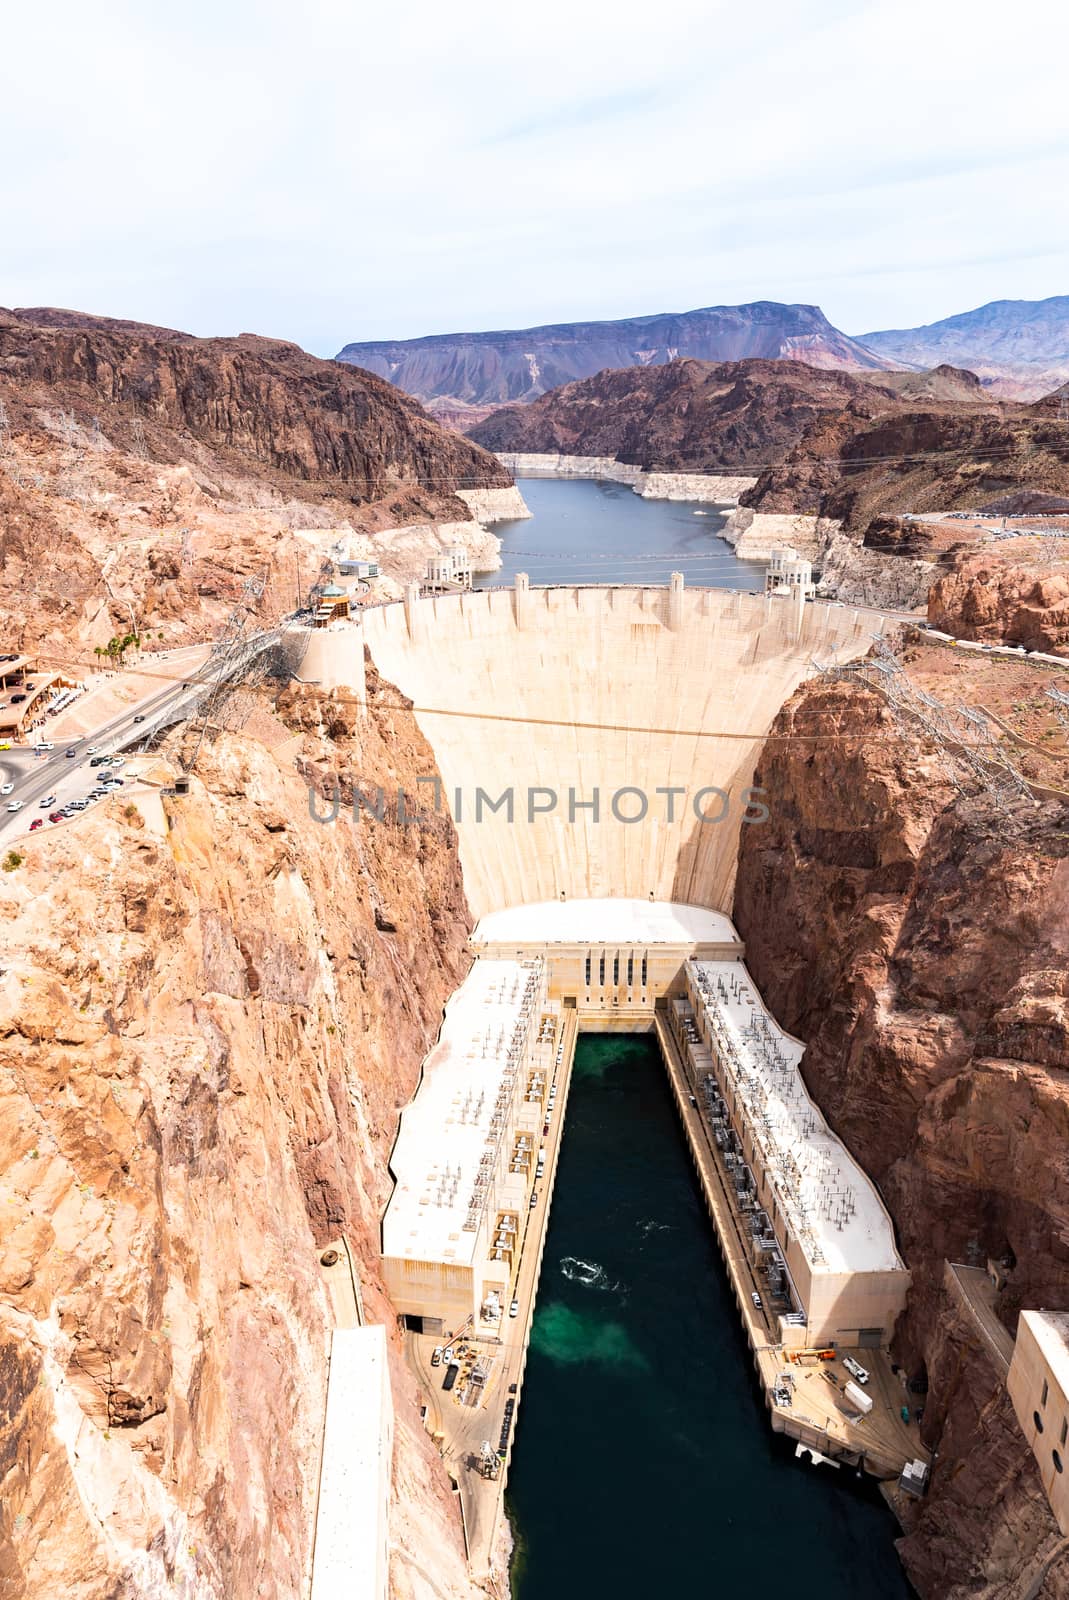 Hoover dam USA by vichie81